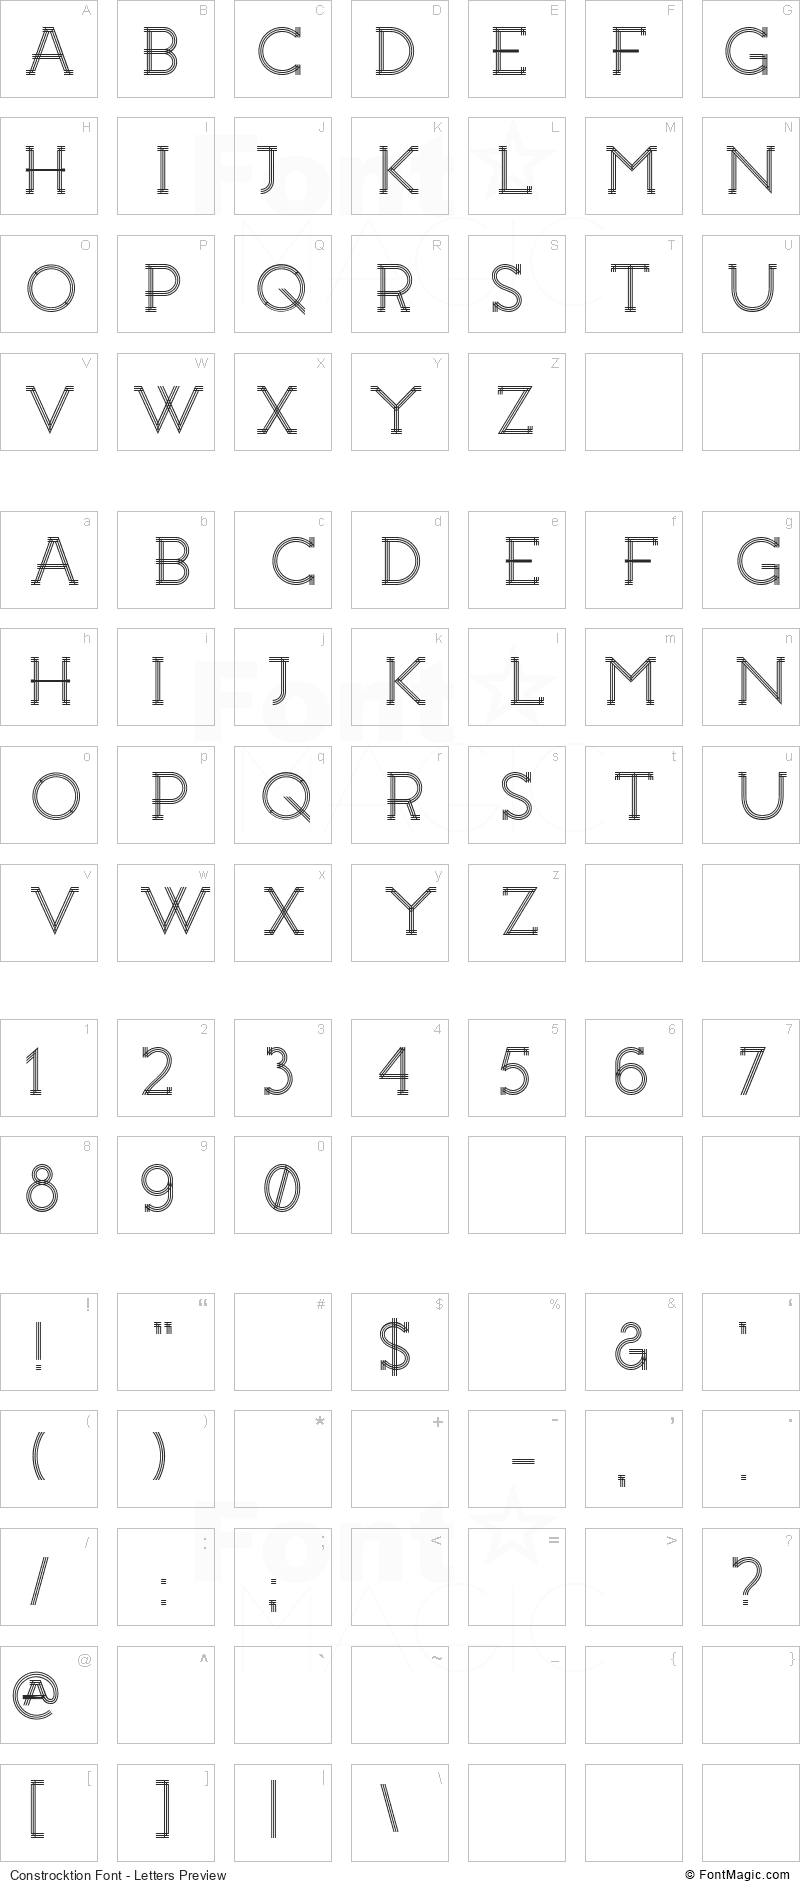 Constrocktion Font - All Latters Preview Chart